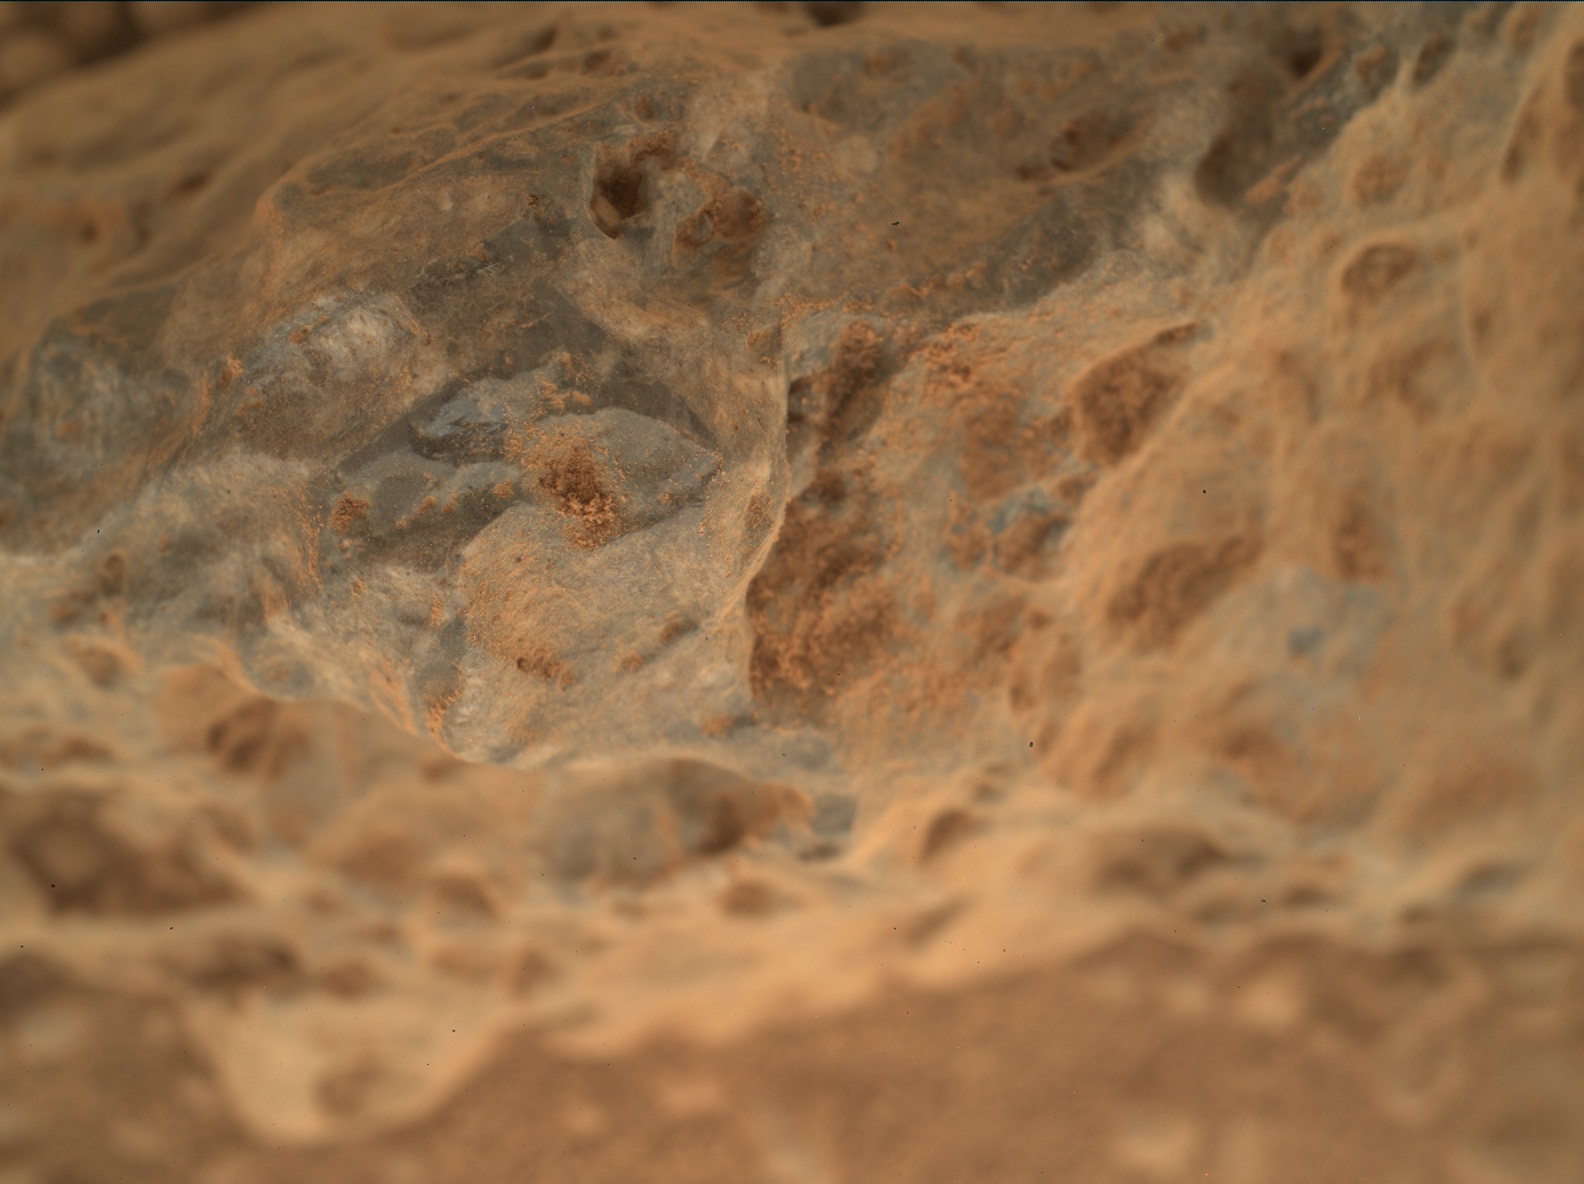 Nasa's Mars rover Curiosity acquired this image using its Mars Hand Lens Imager (MAHLI) on Sol 373